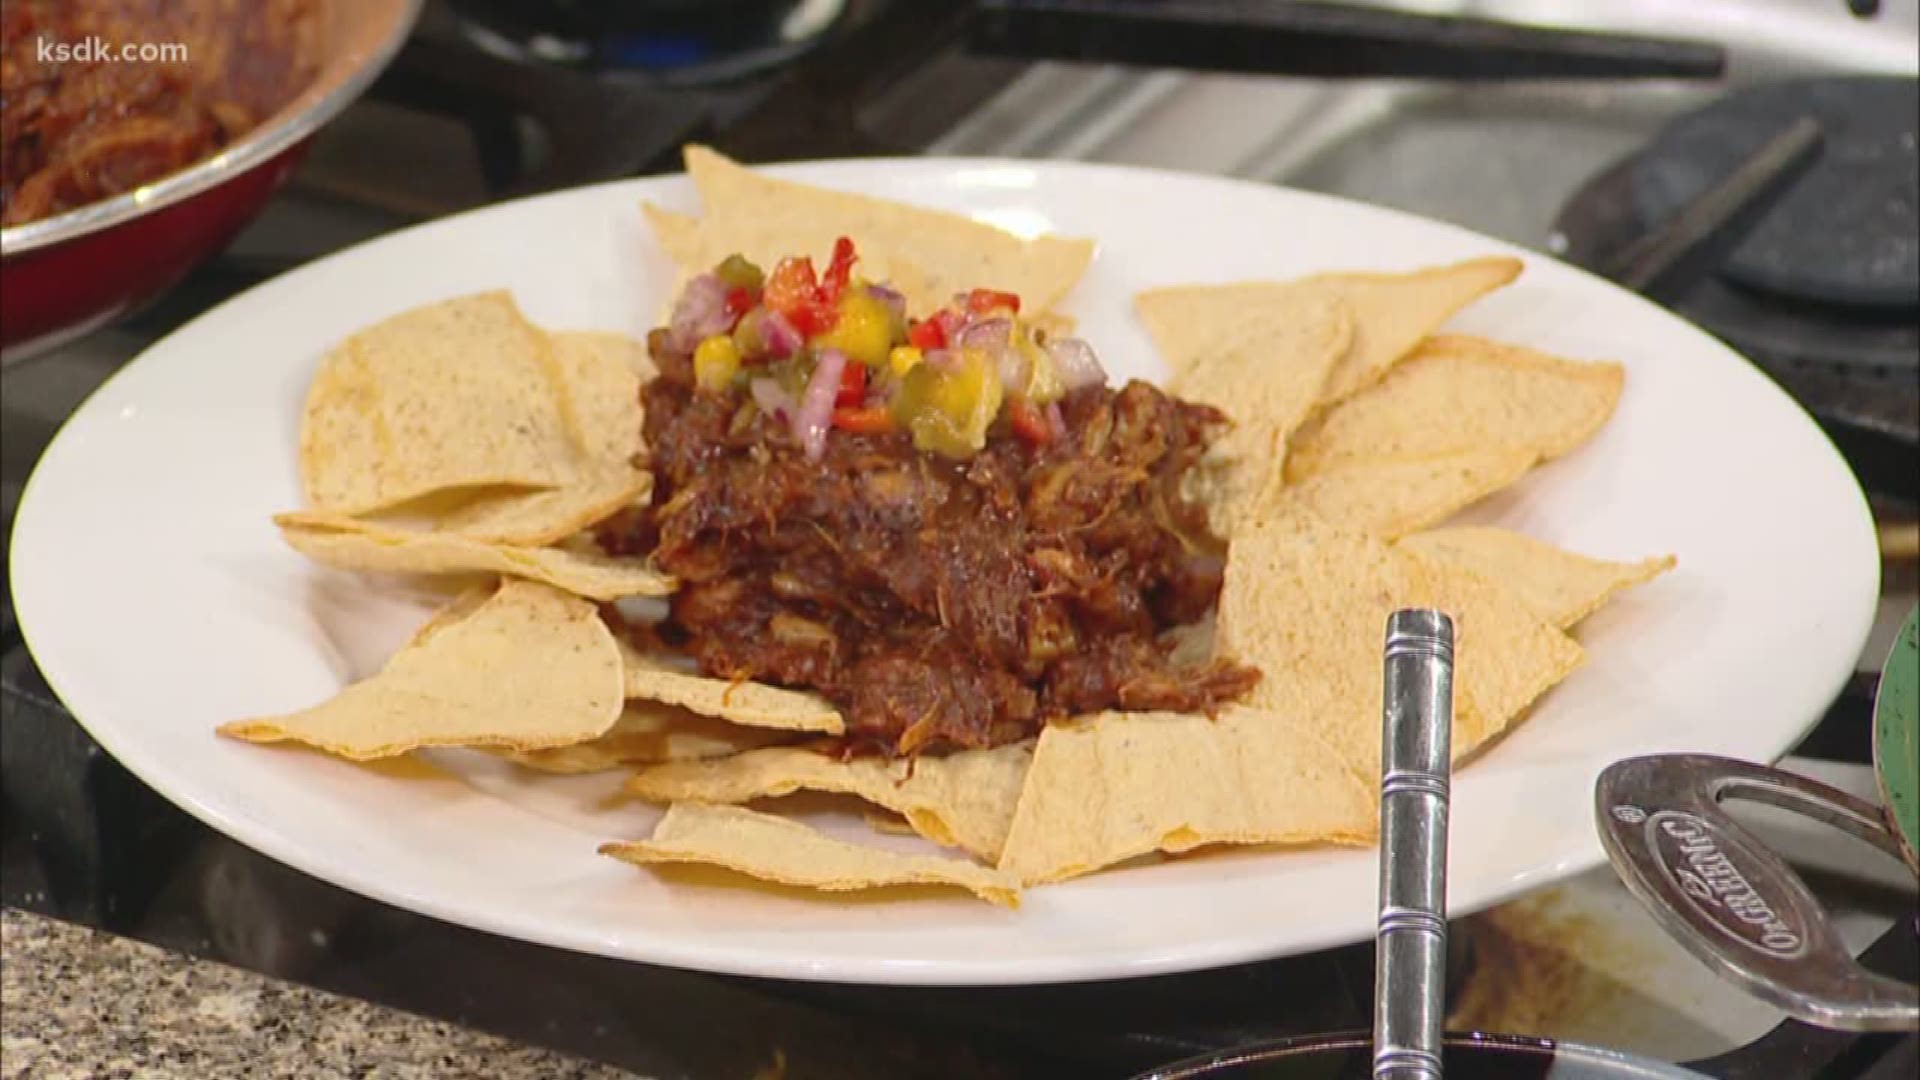 STL Veg Girl Caryn Dugan shared a recipe that would make a great appetizer for your next party!